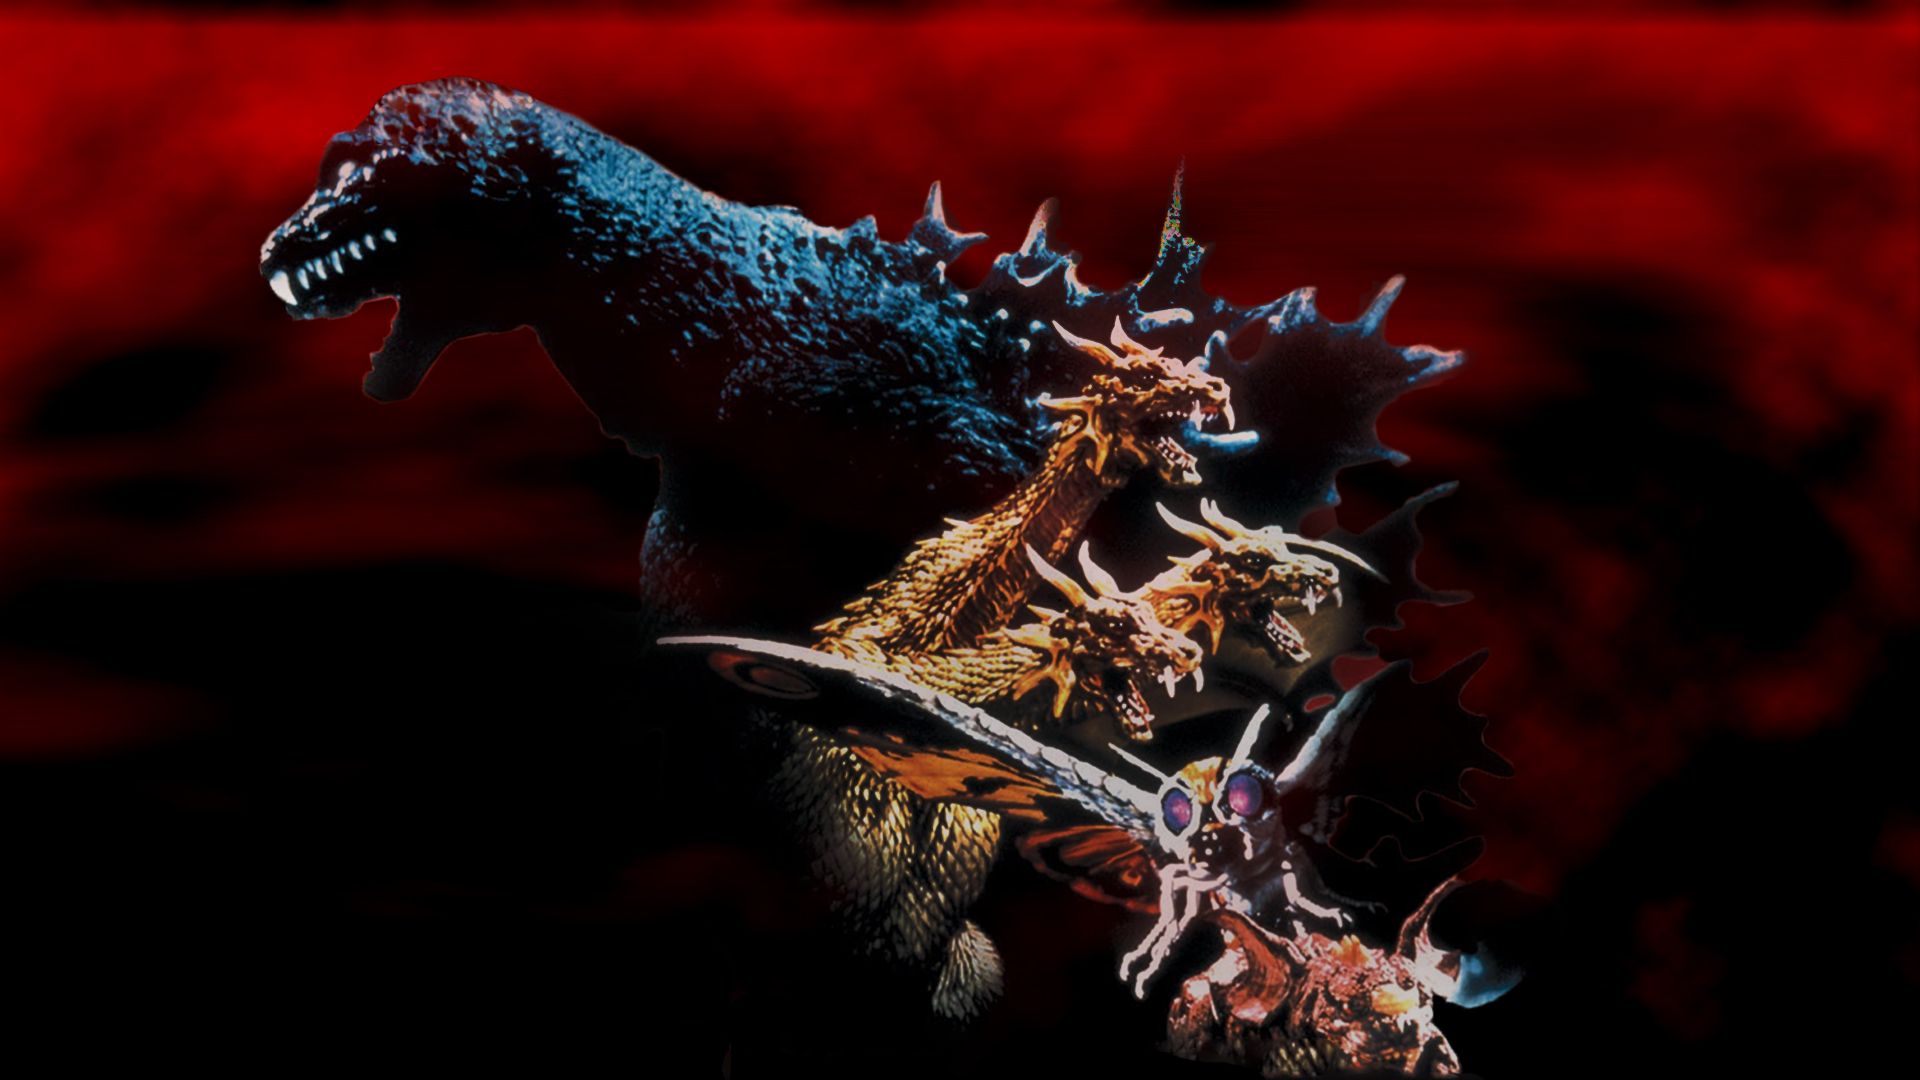 Godzilla, Mothra and King Ghidorah: Attack of the Giant Monsters background